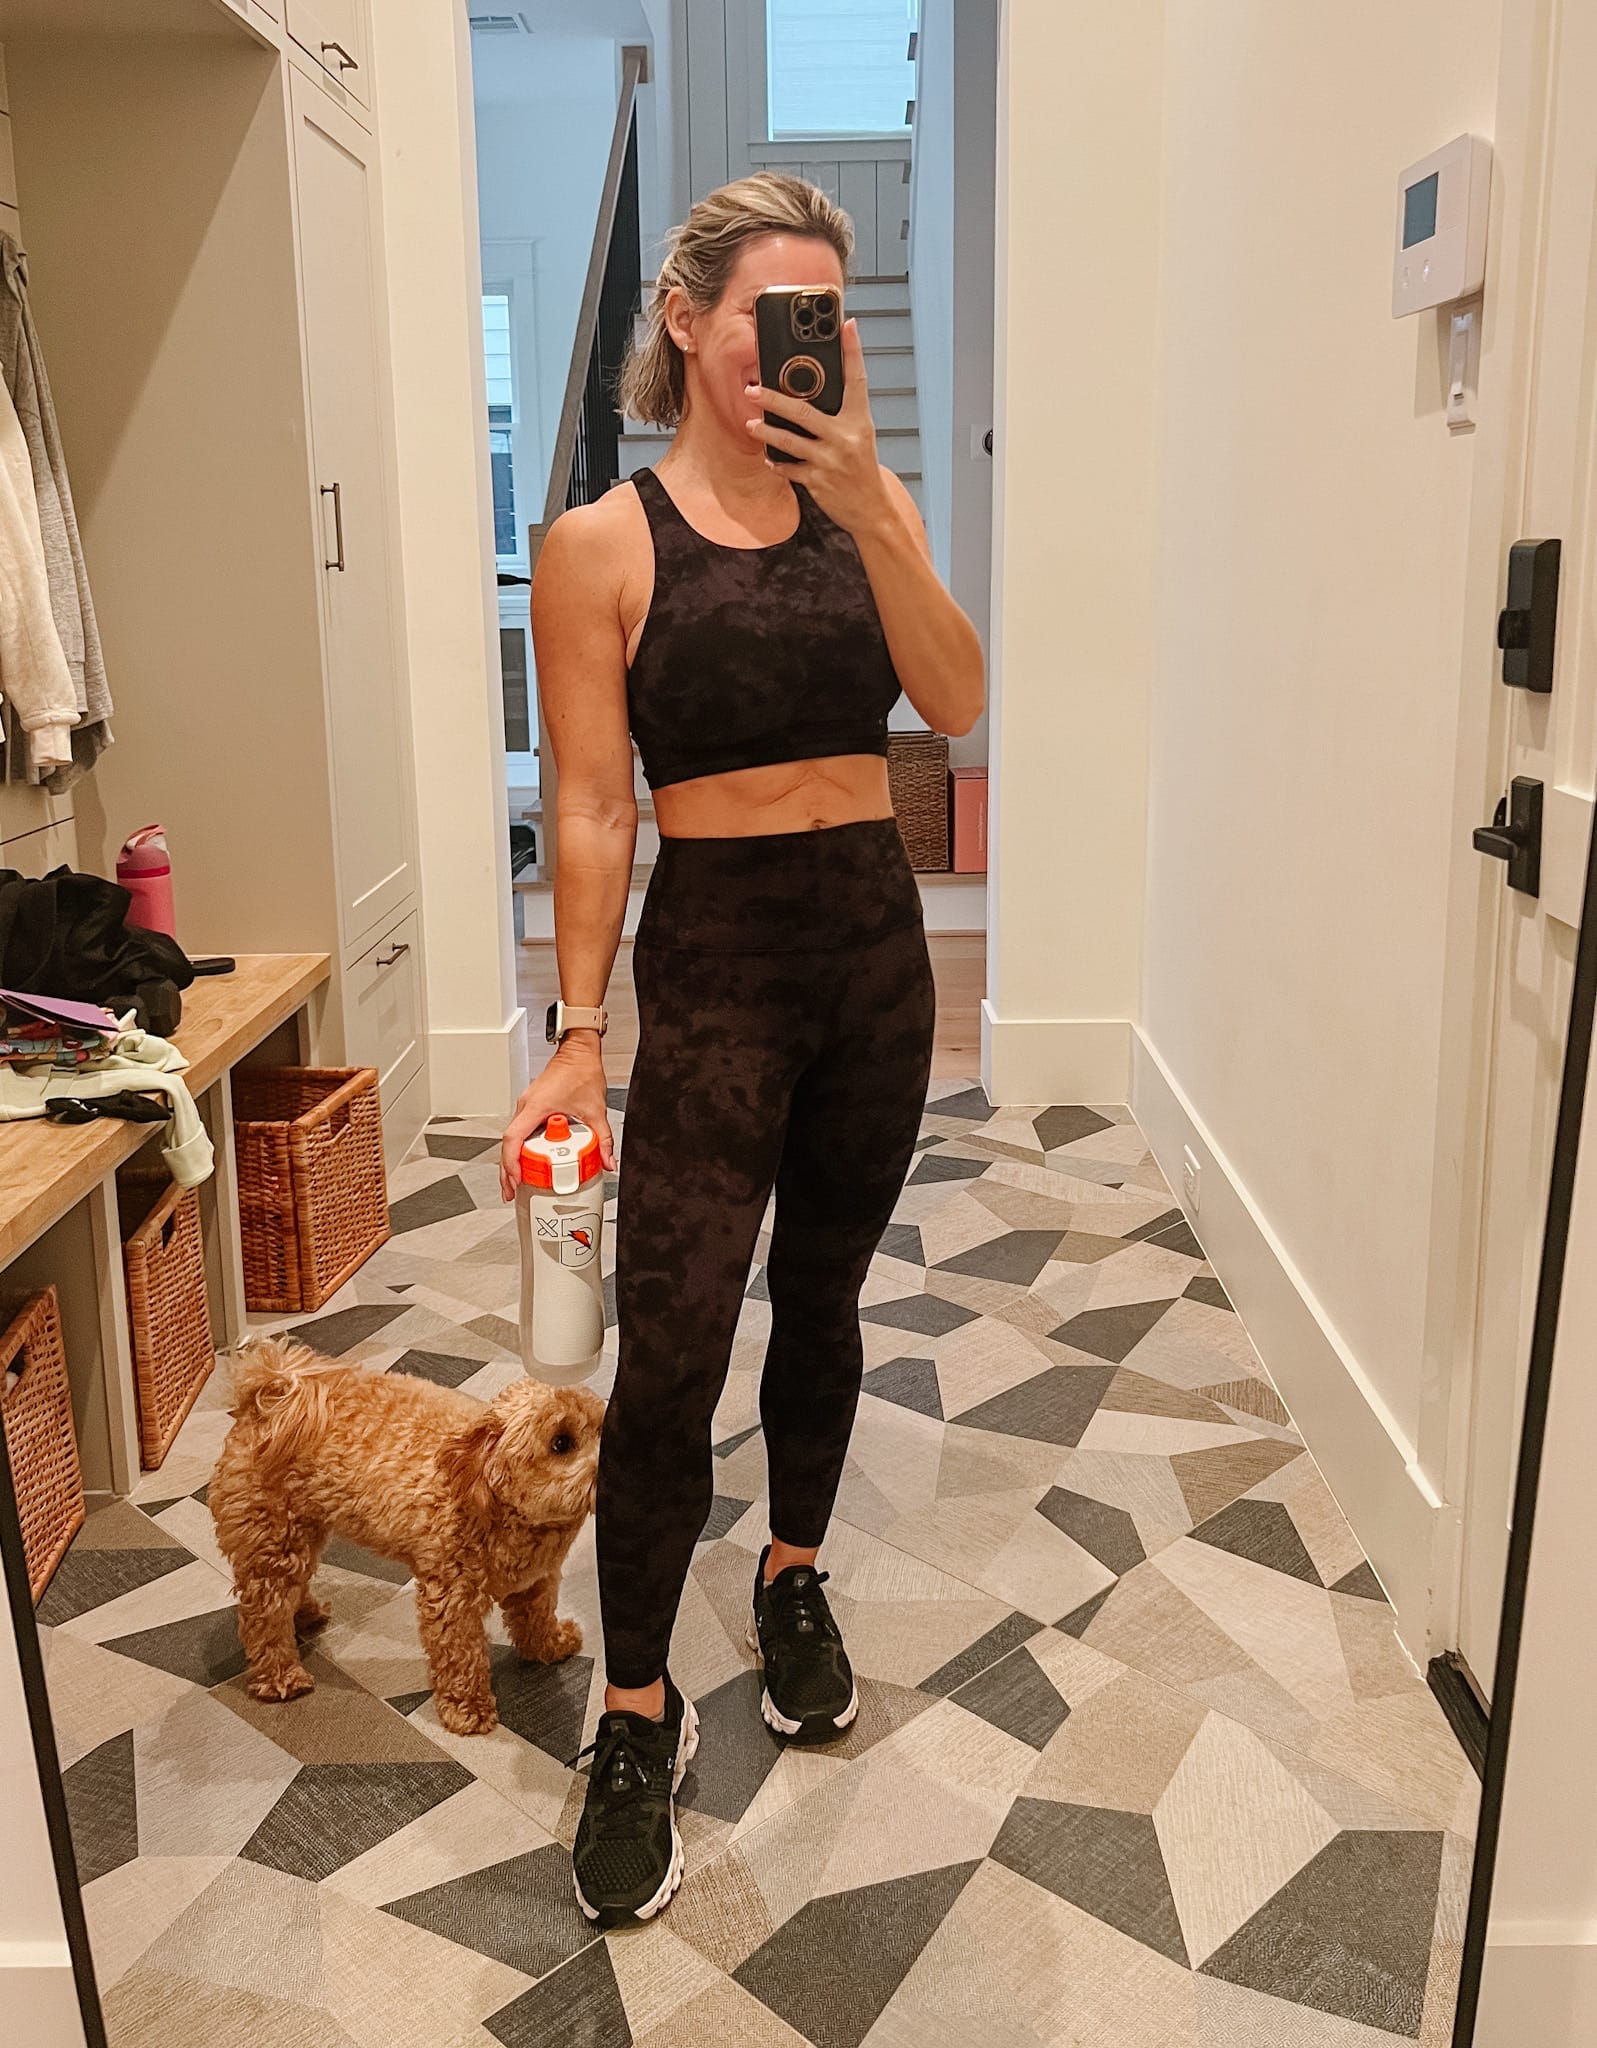 Wear It For Less - My new HeyNuts Essential 7/8 Leggings have